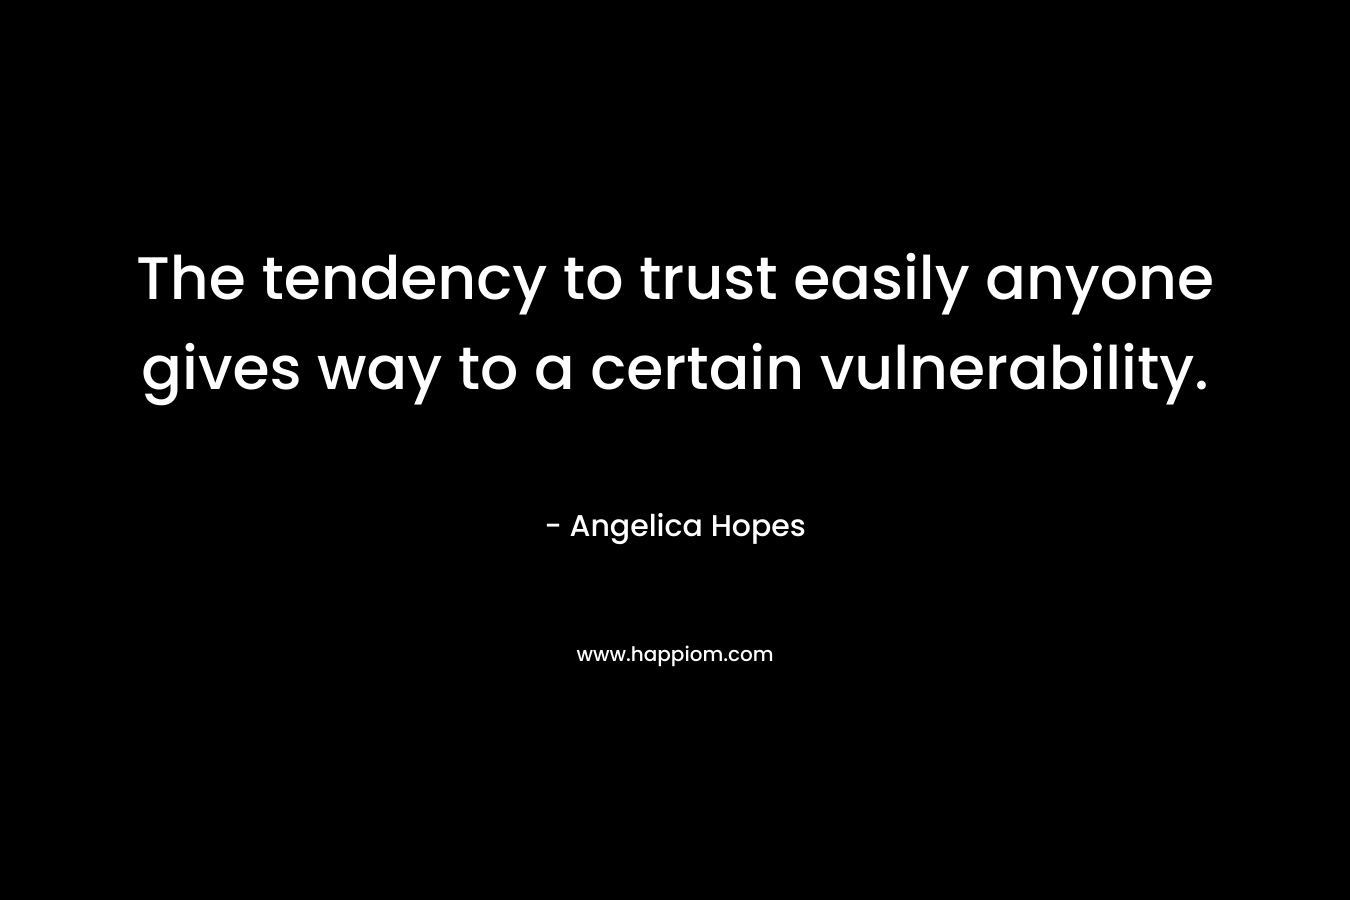 The tendency to trust easily anyone gives way to a certain vulnerability.